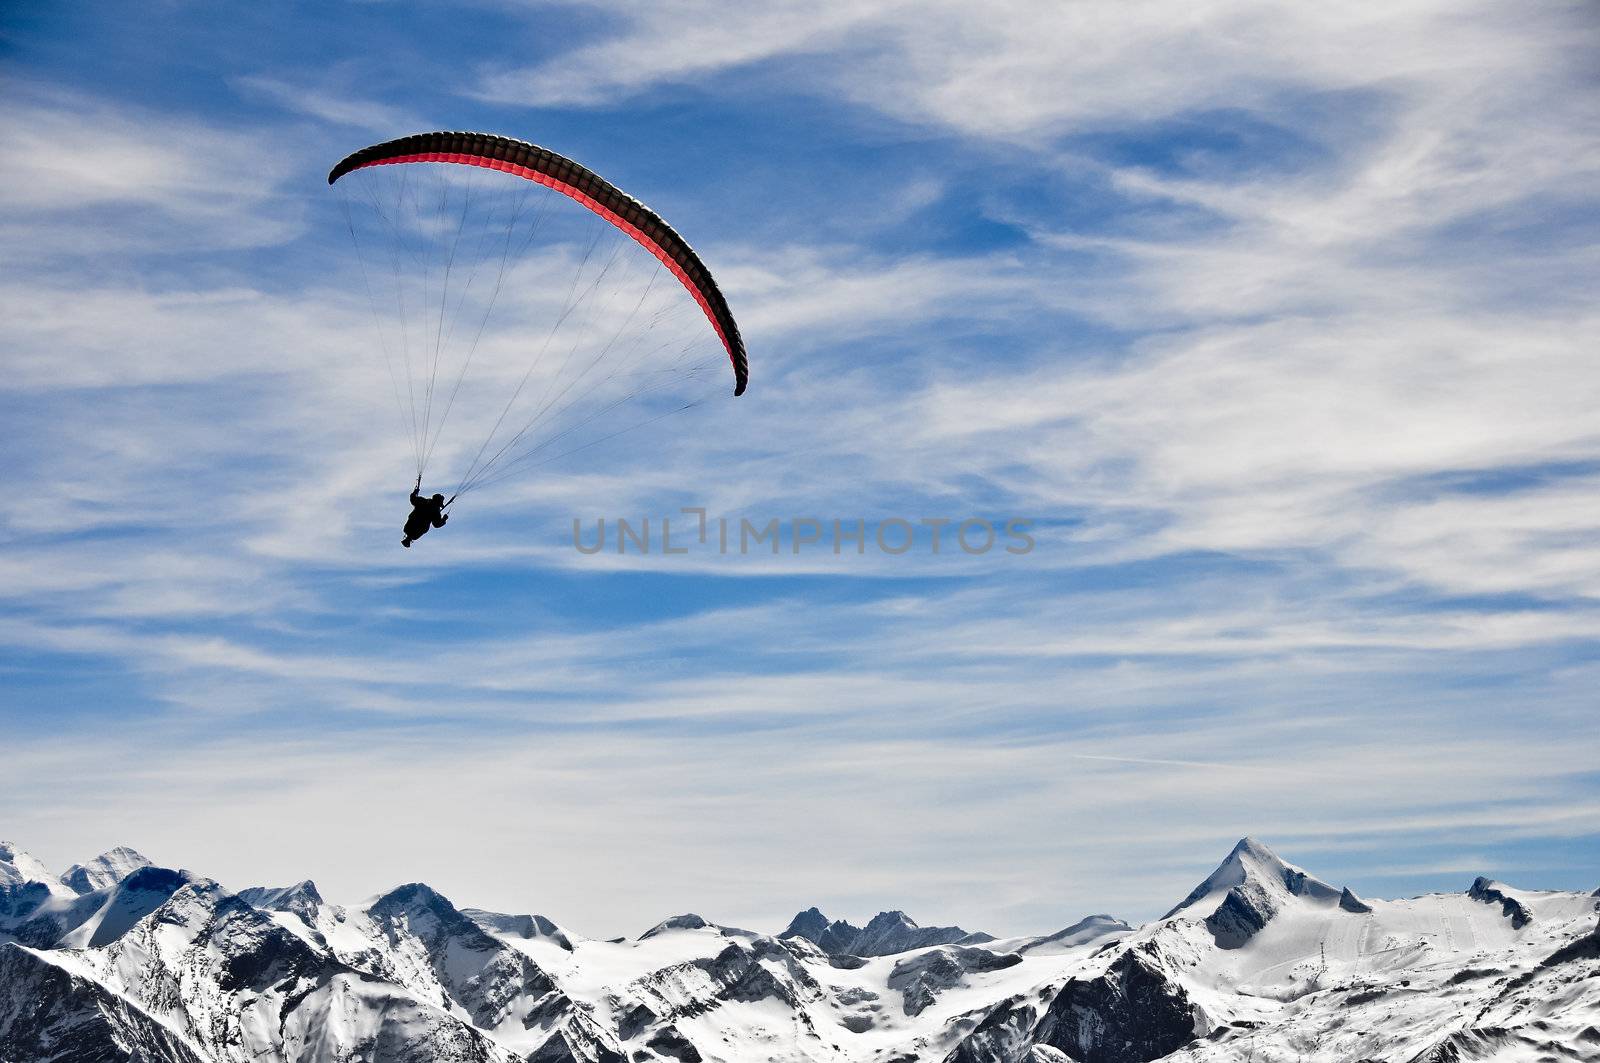 Winter mountains and paragliding with mountains background by martinm303